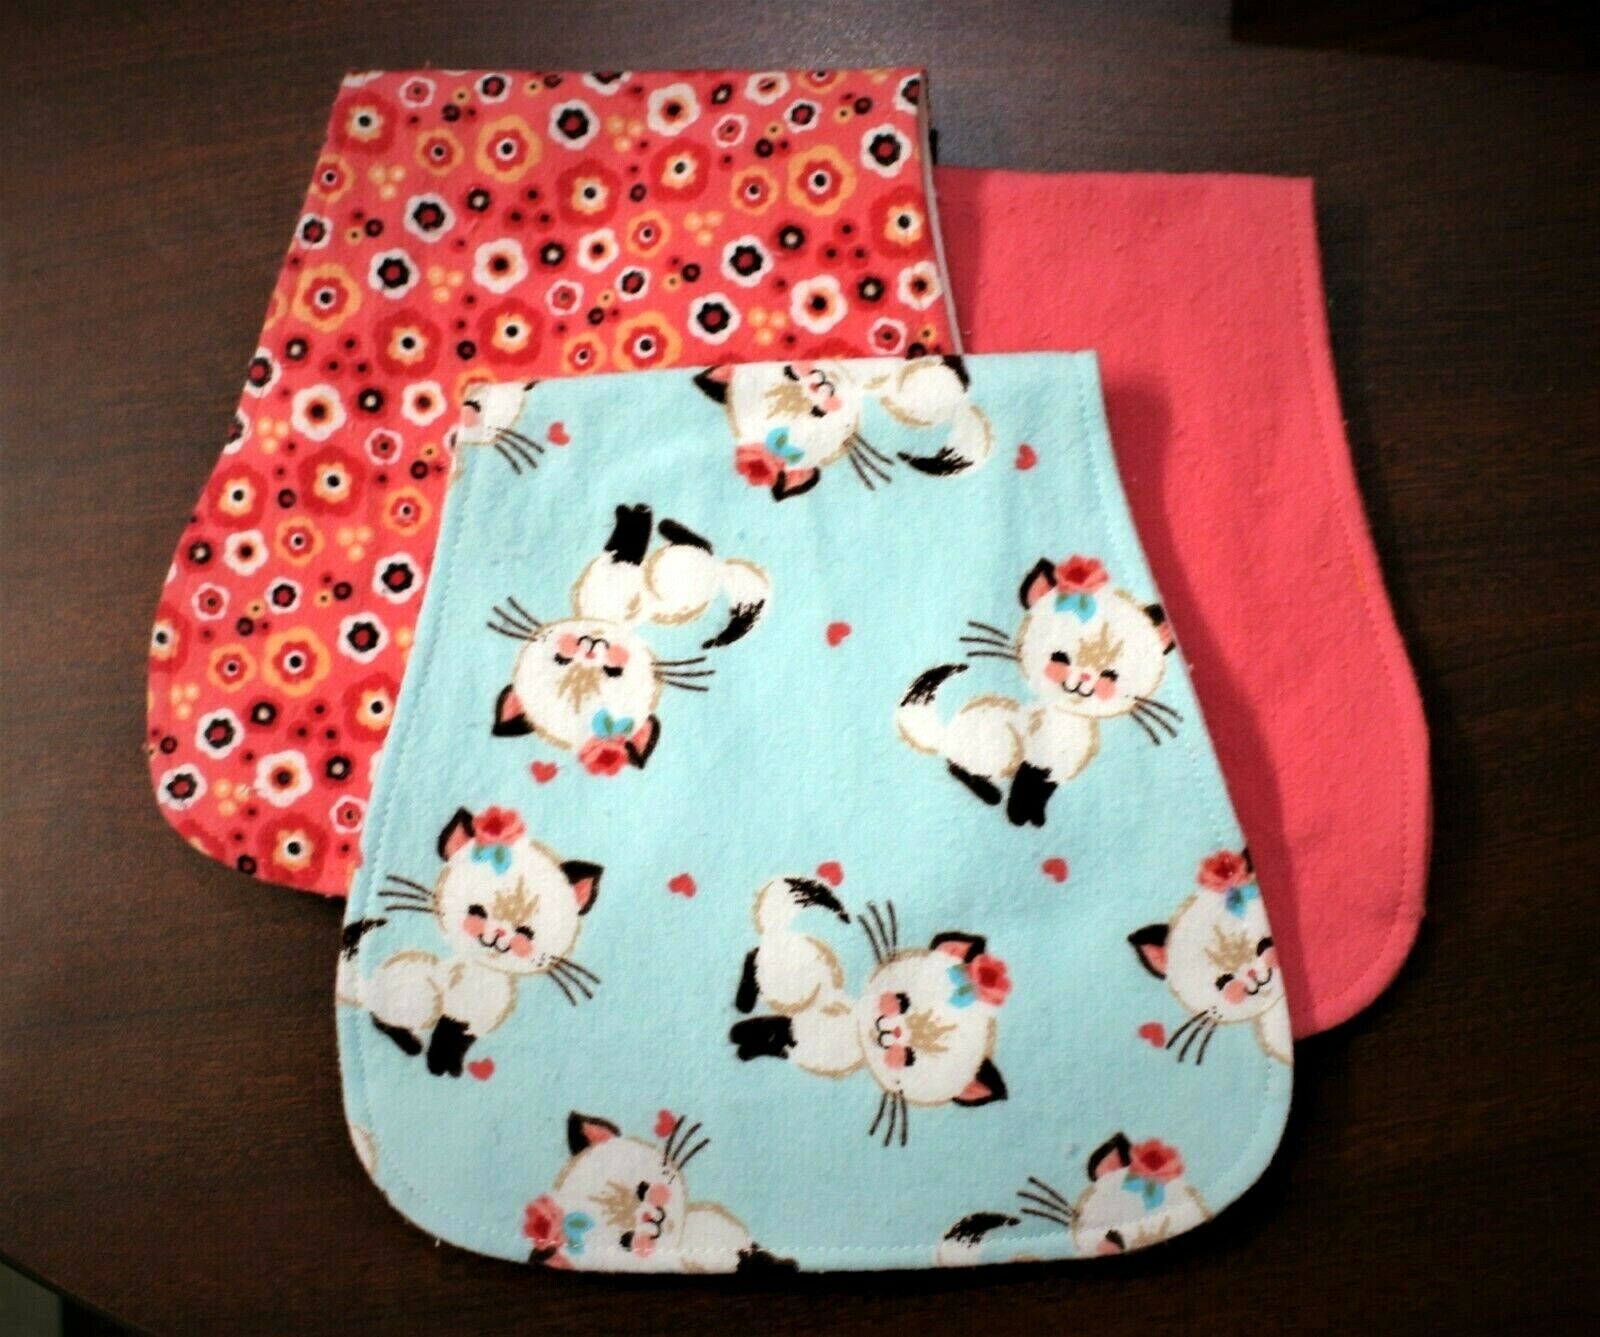 Kittens Floral Prints Cotton Flannel Burp Cloth Set Of 3 -personalized